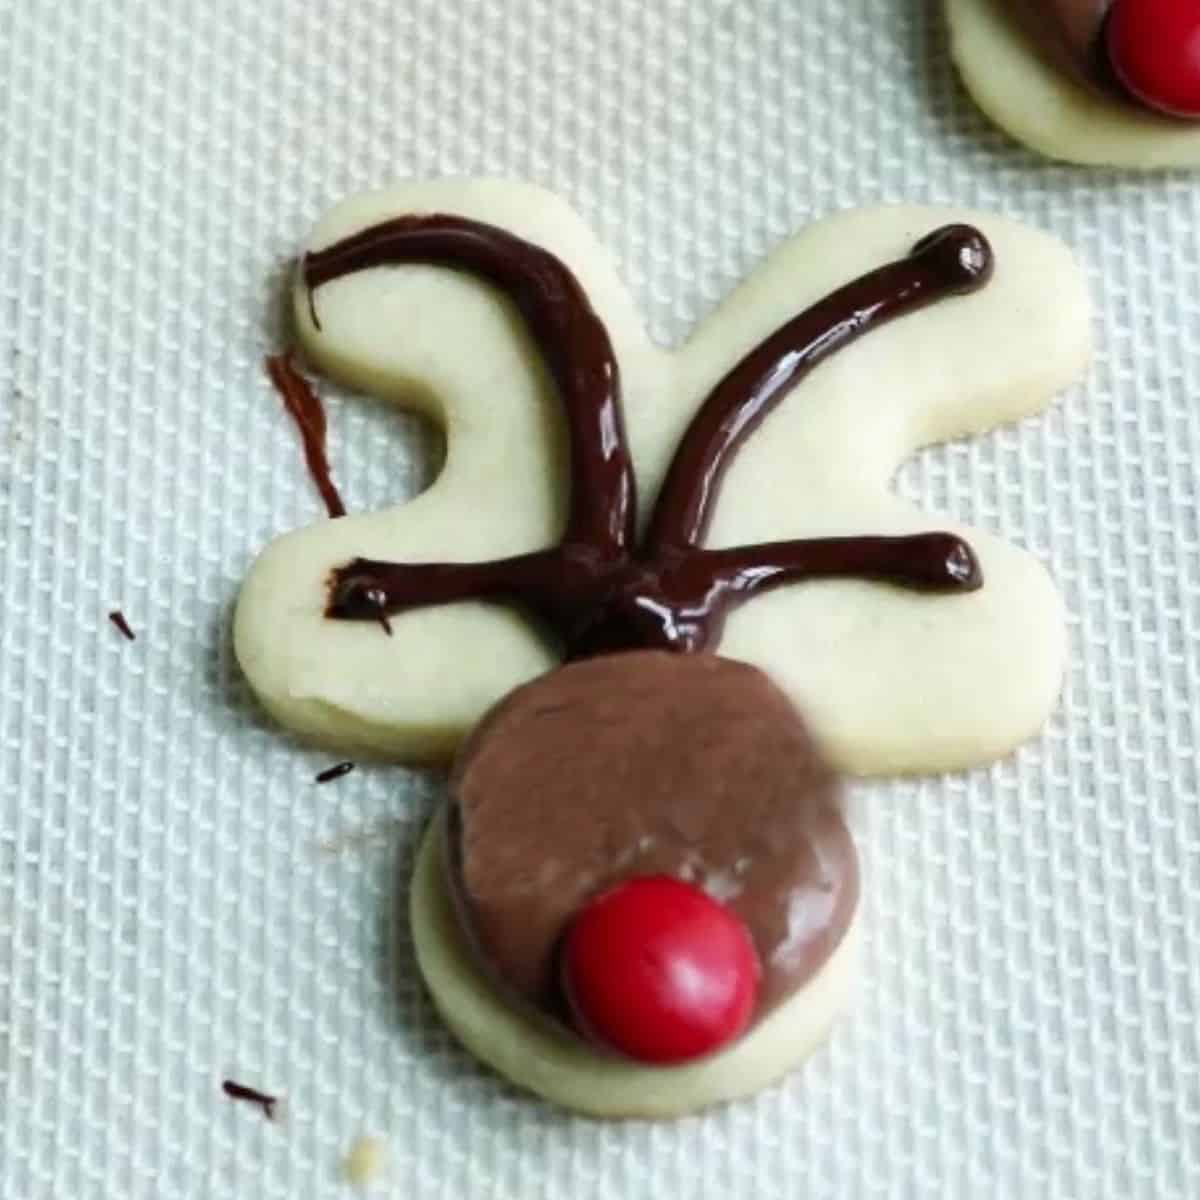 Piped chocolate for antlers on a gingerbread body.